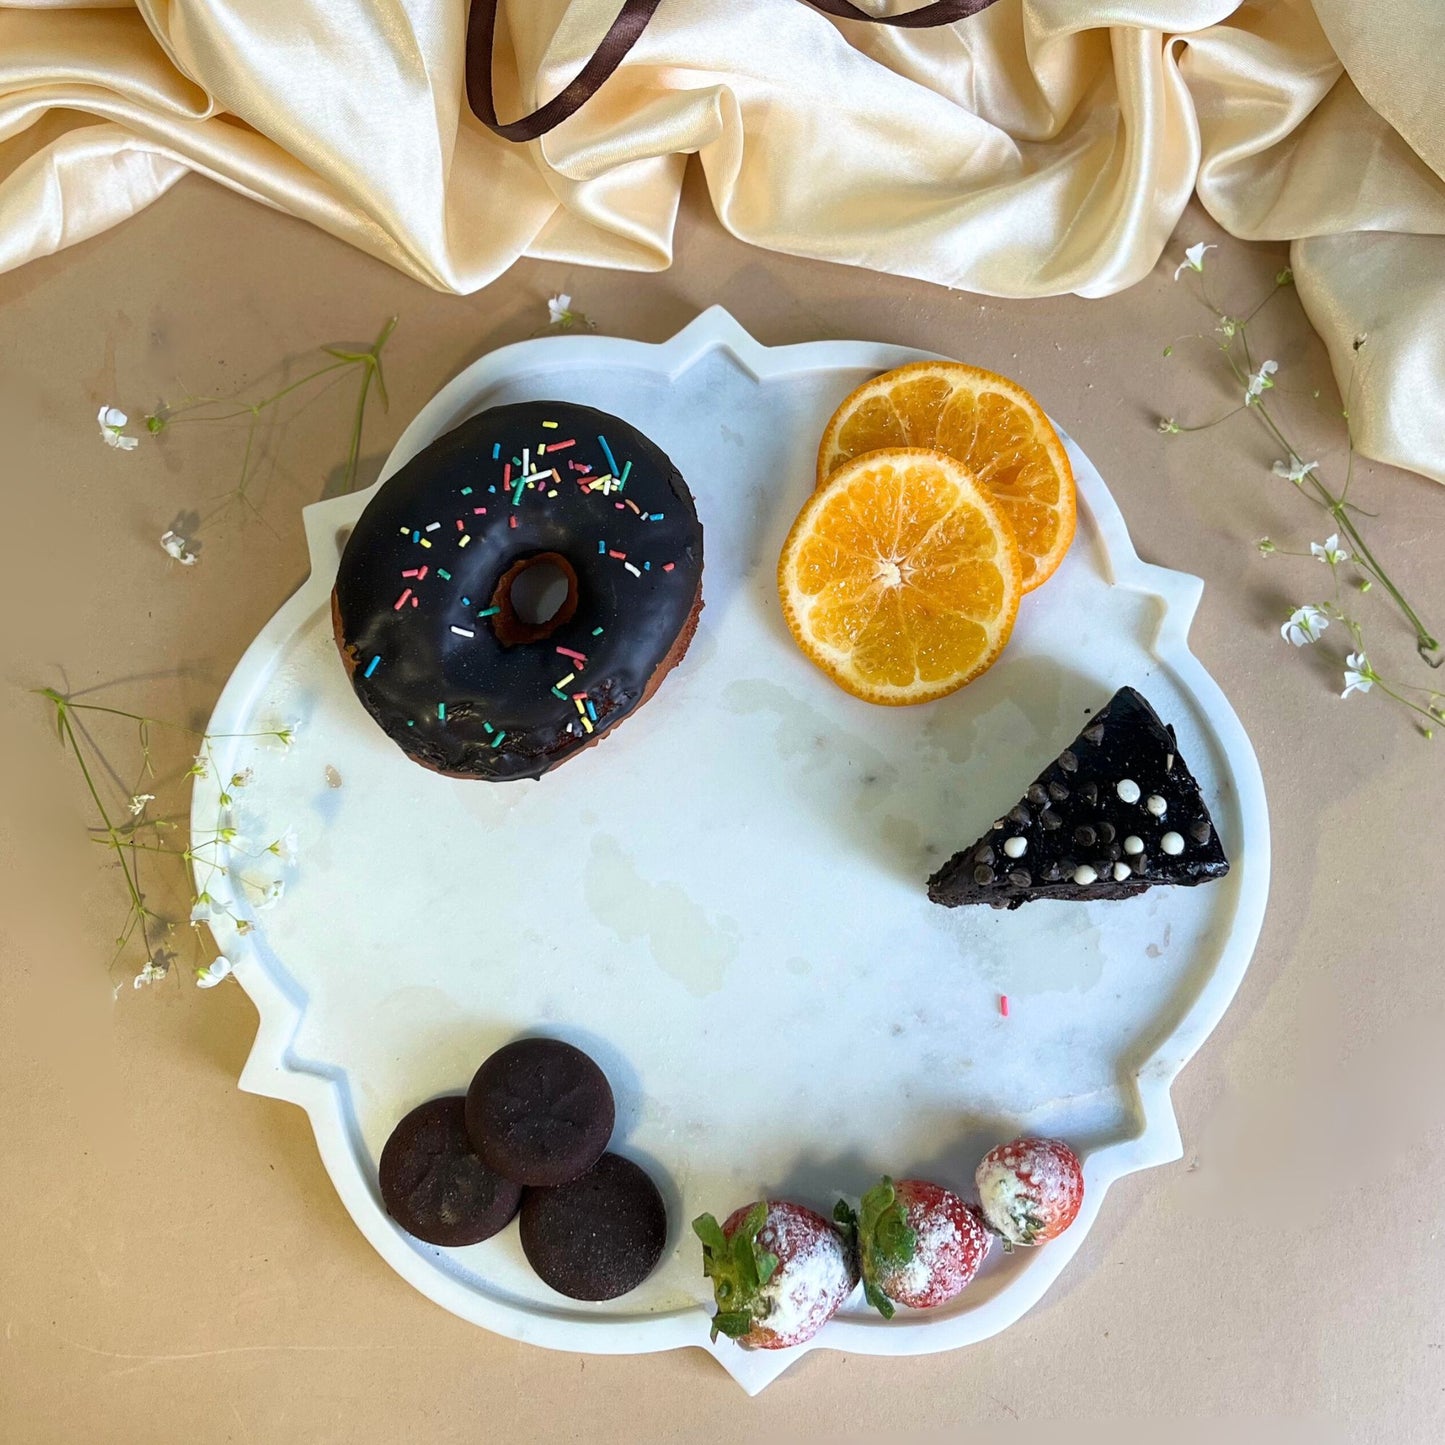 Marble Platter 12 Inches Decorative Floral Shape Platter Fruit Dessert Cup Cake for Birthday Anniversary- White